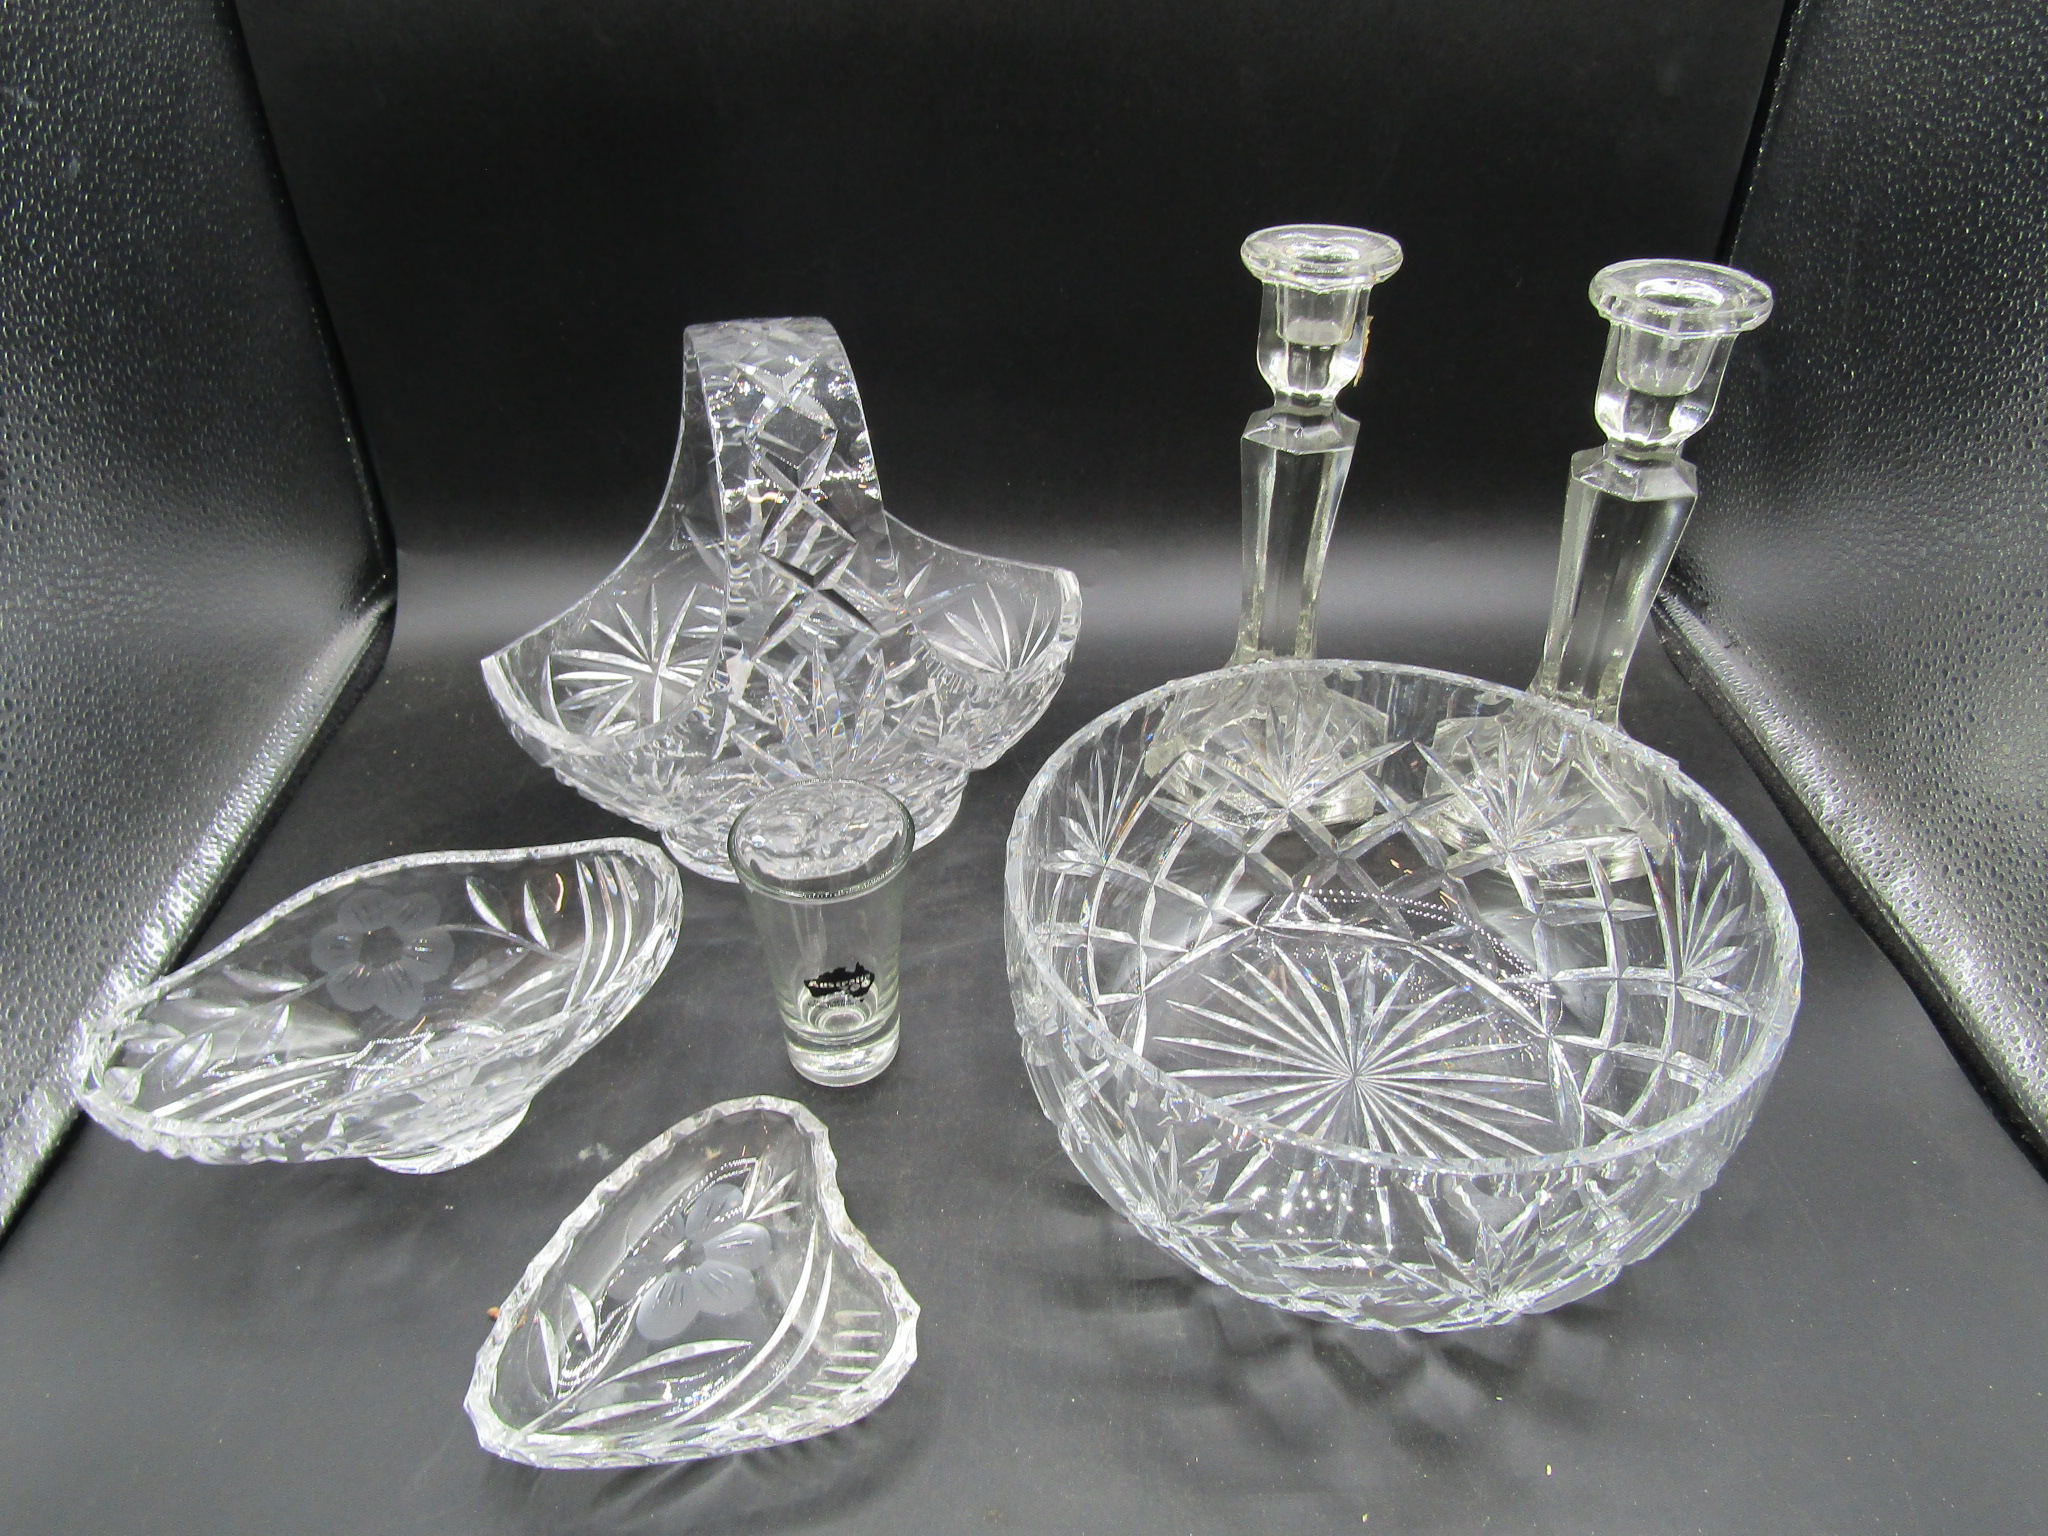 Art Deco glass dressing table set and other glassware - Image 2 of 7